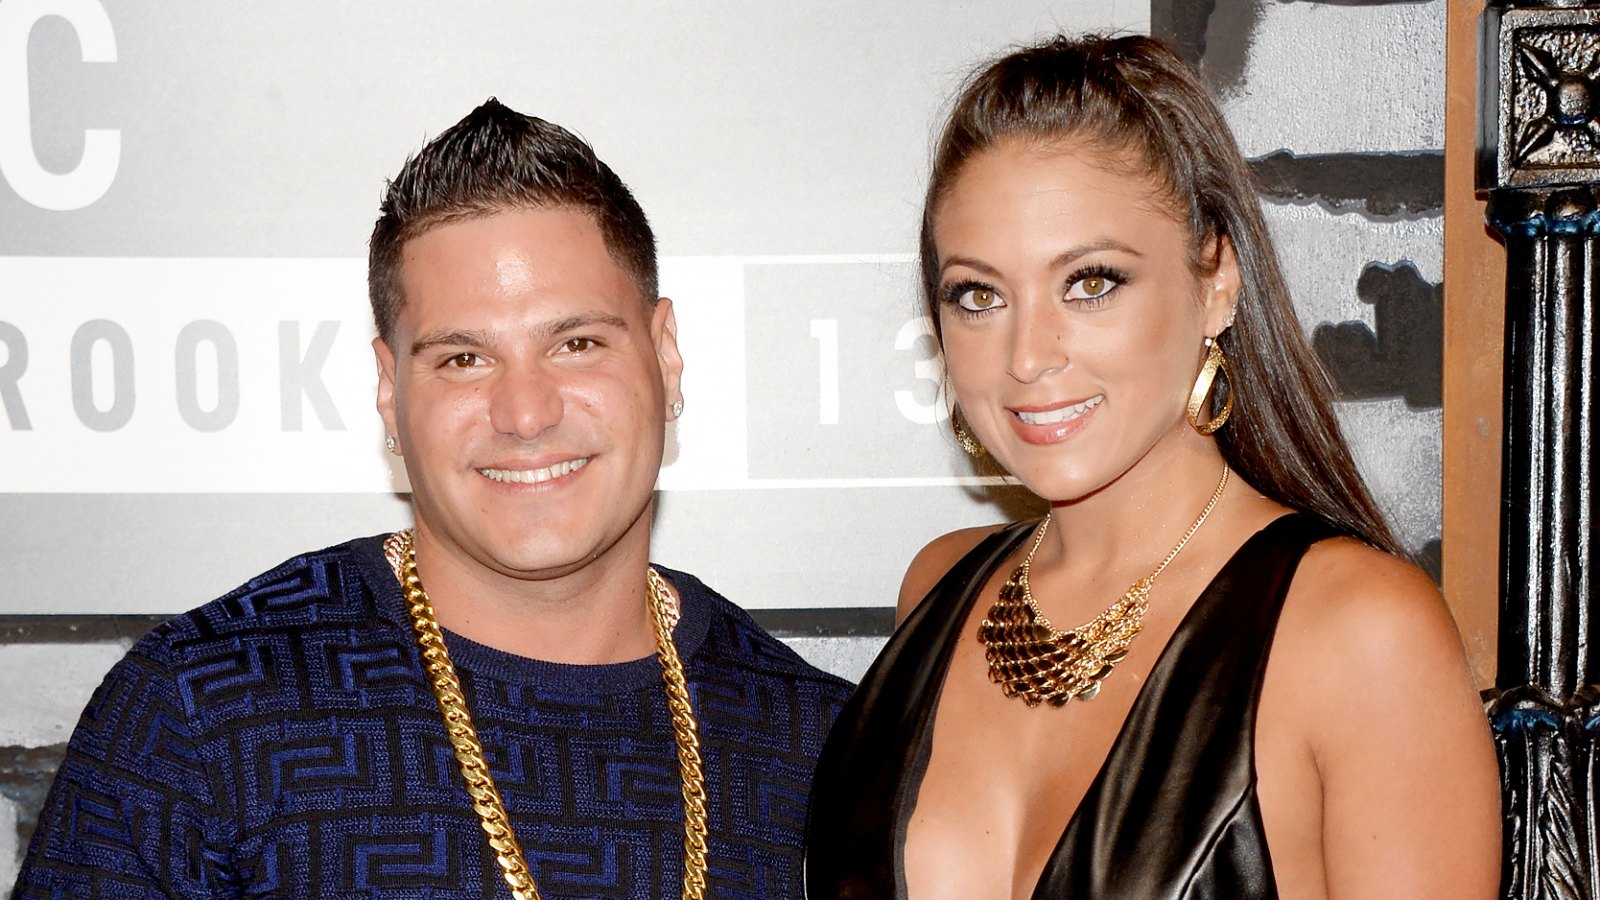 Ronnie-Magro-and-Sammi-Giancola-engagement